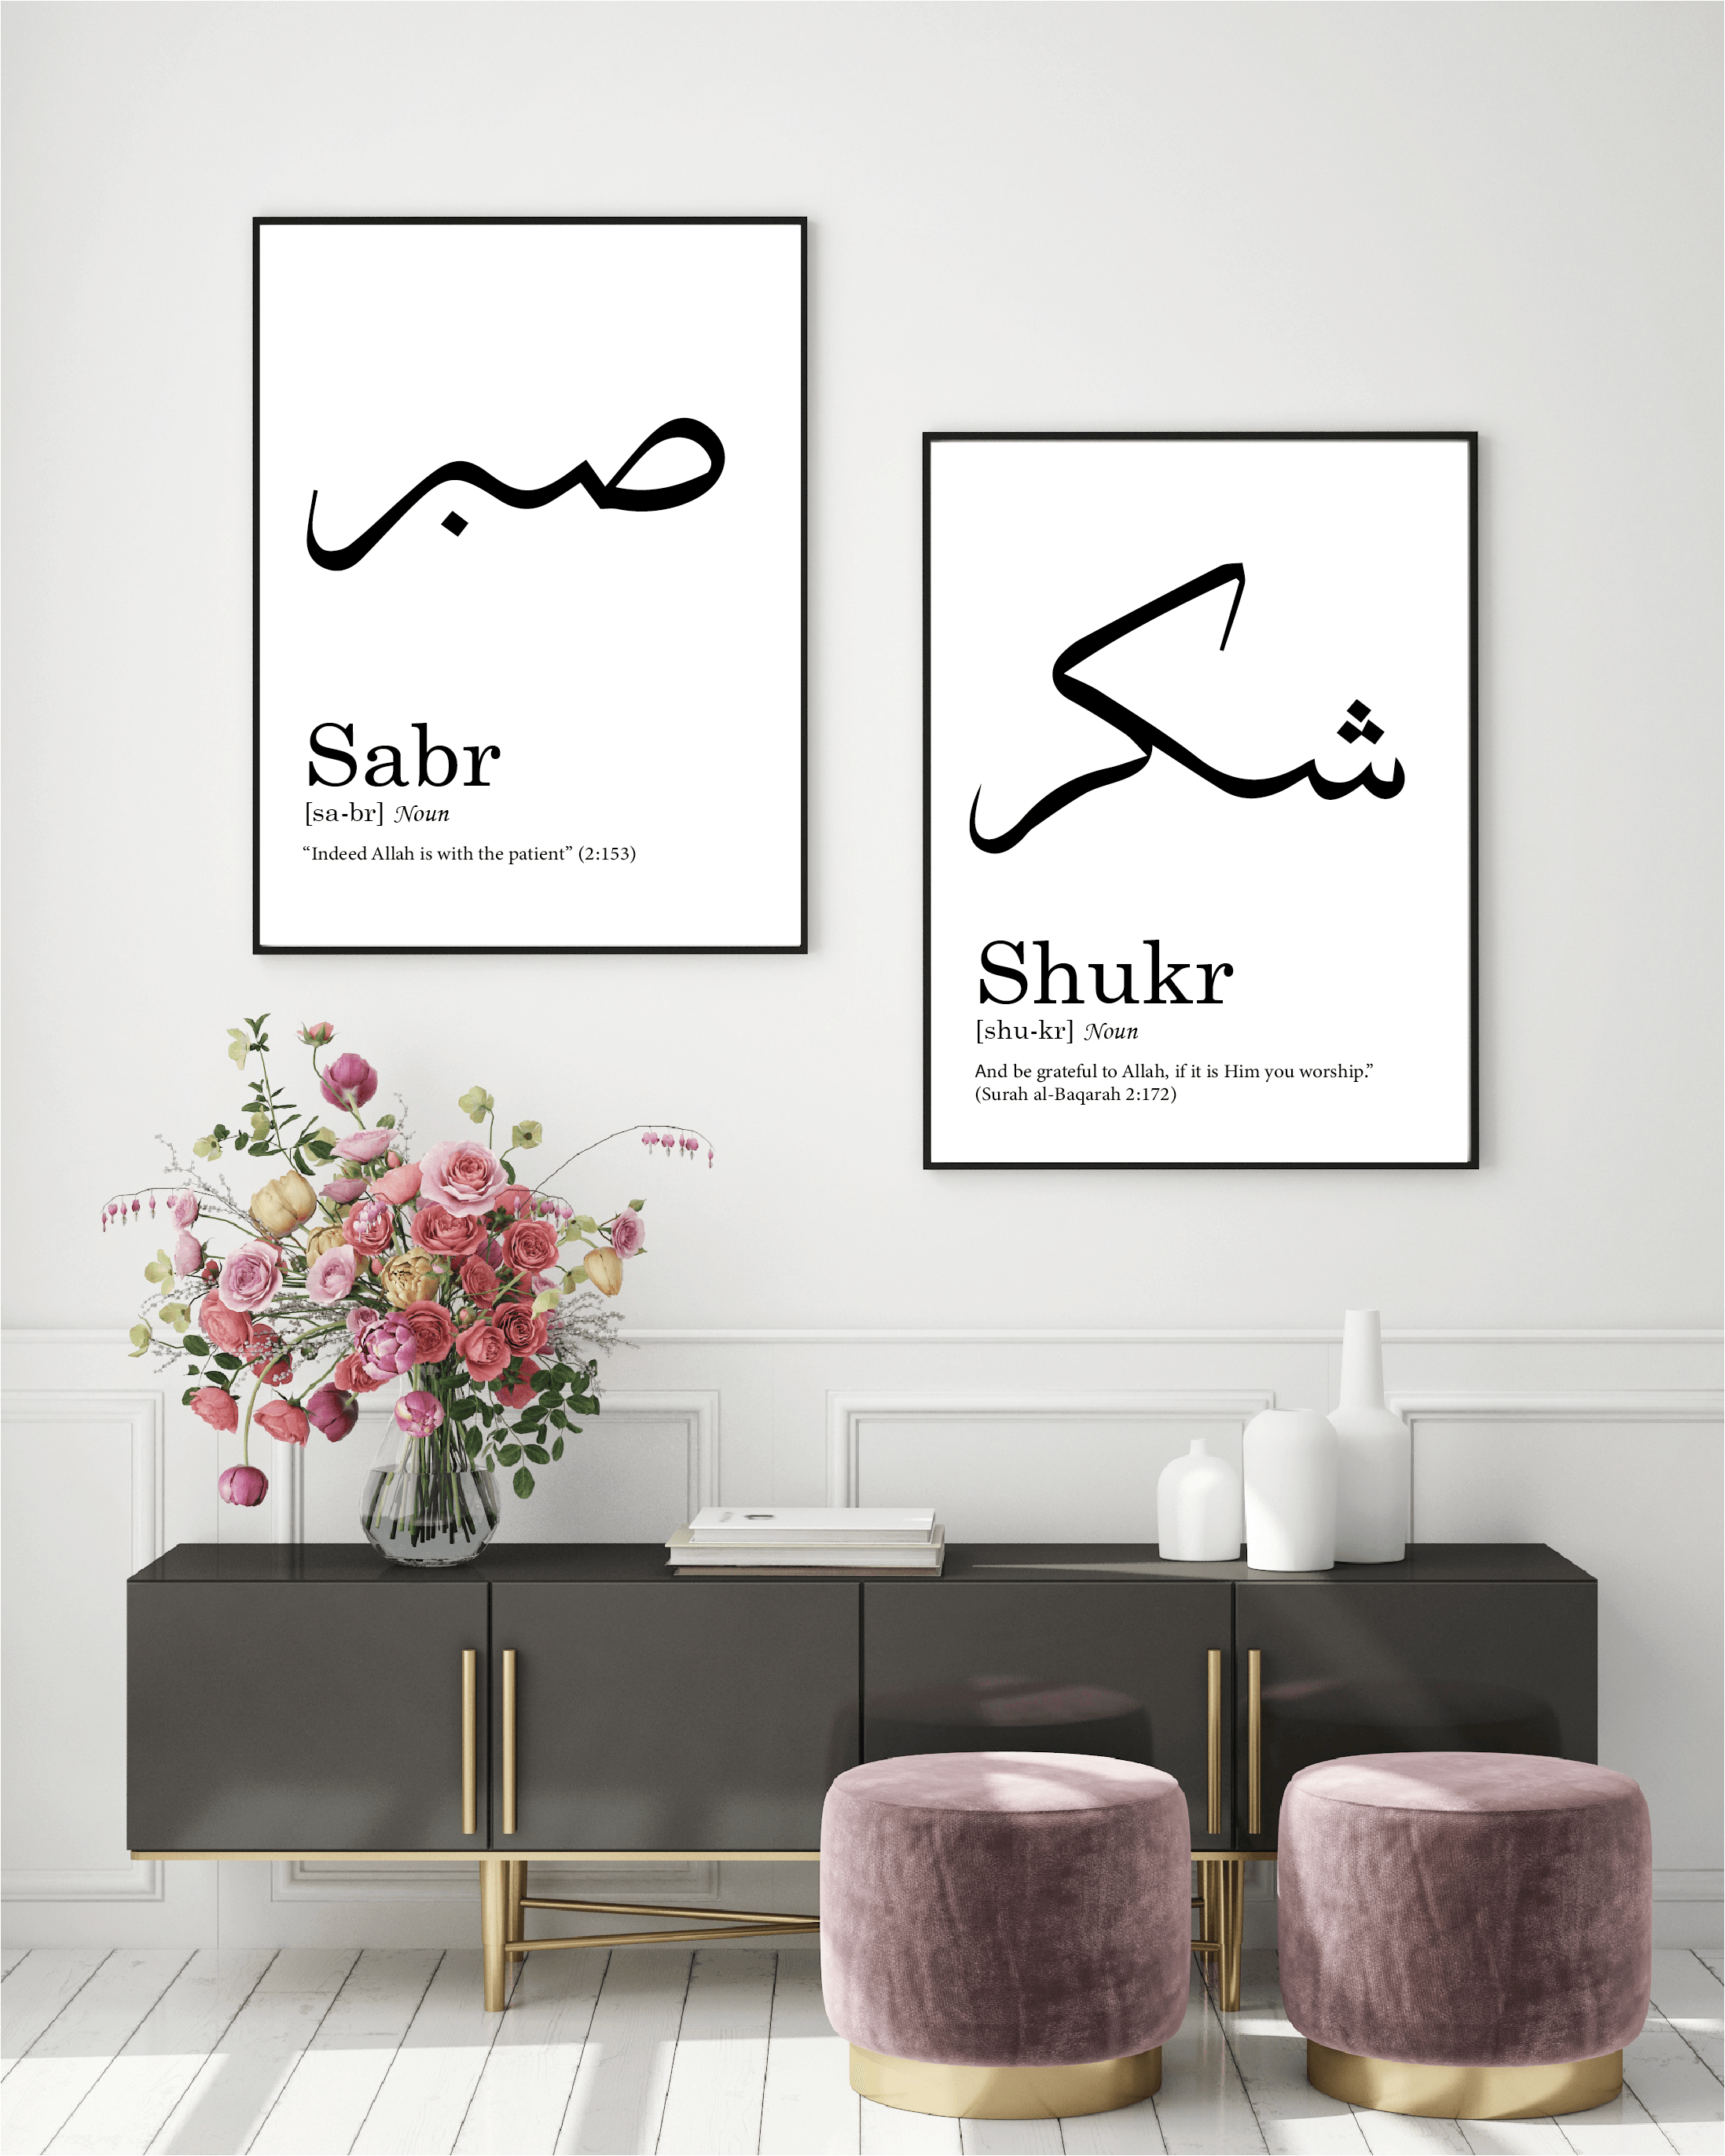 Set of 2 Sabr & Shukr Wall art prints with meaning | Islamic Wall Art Poster - Peaceful Arts